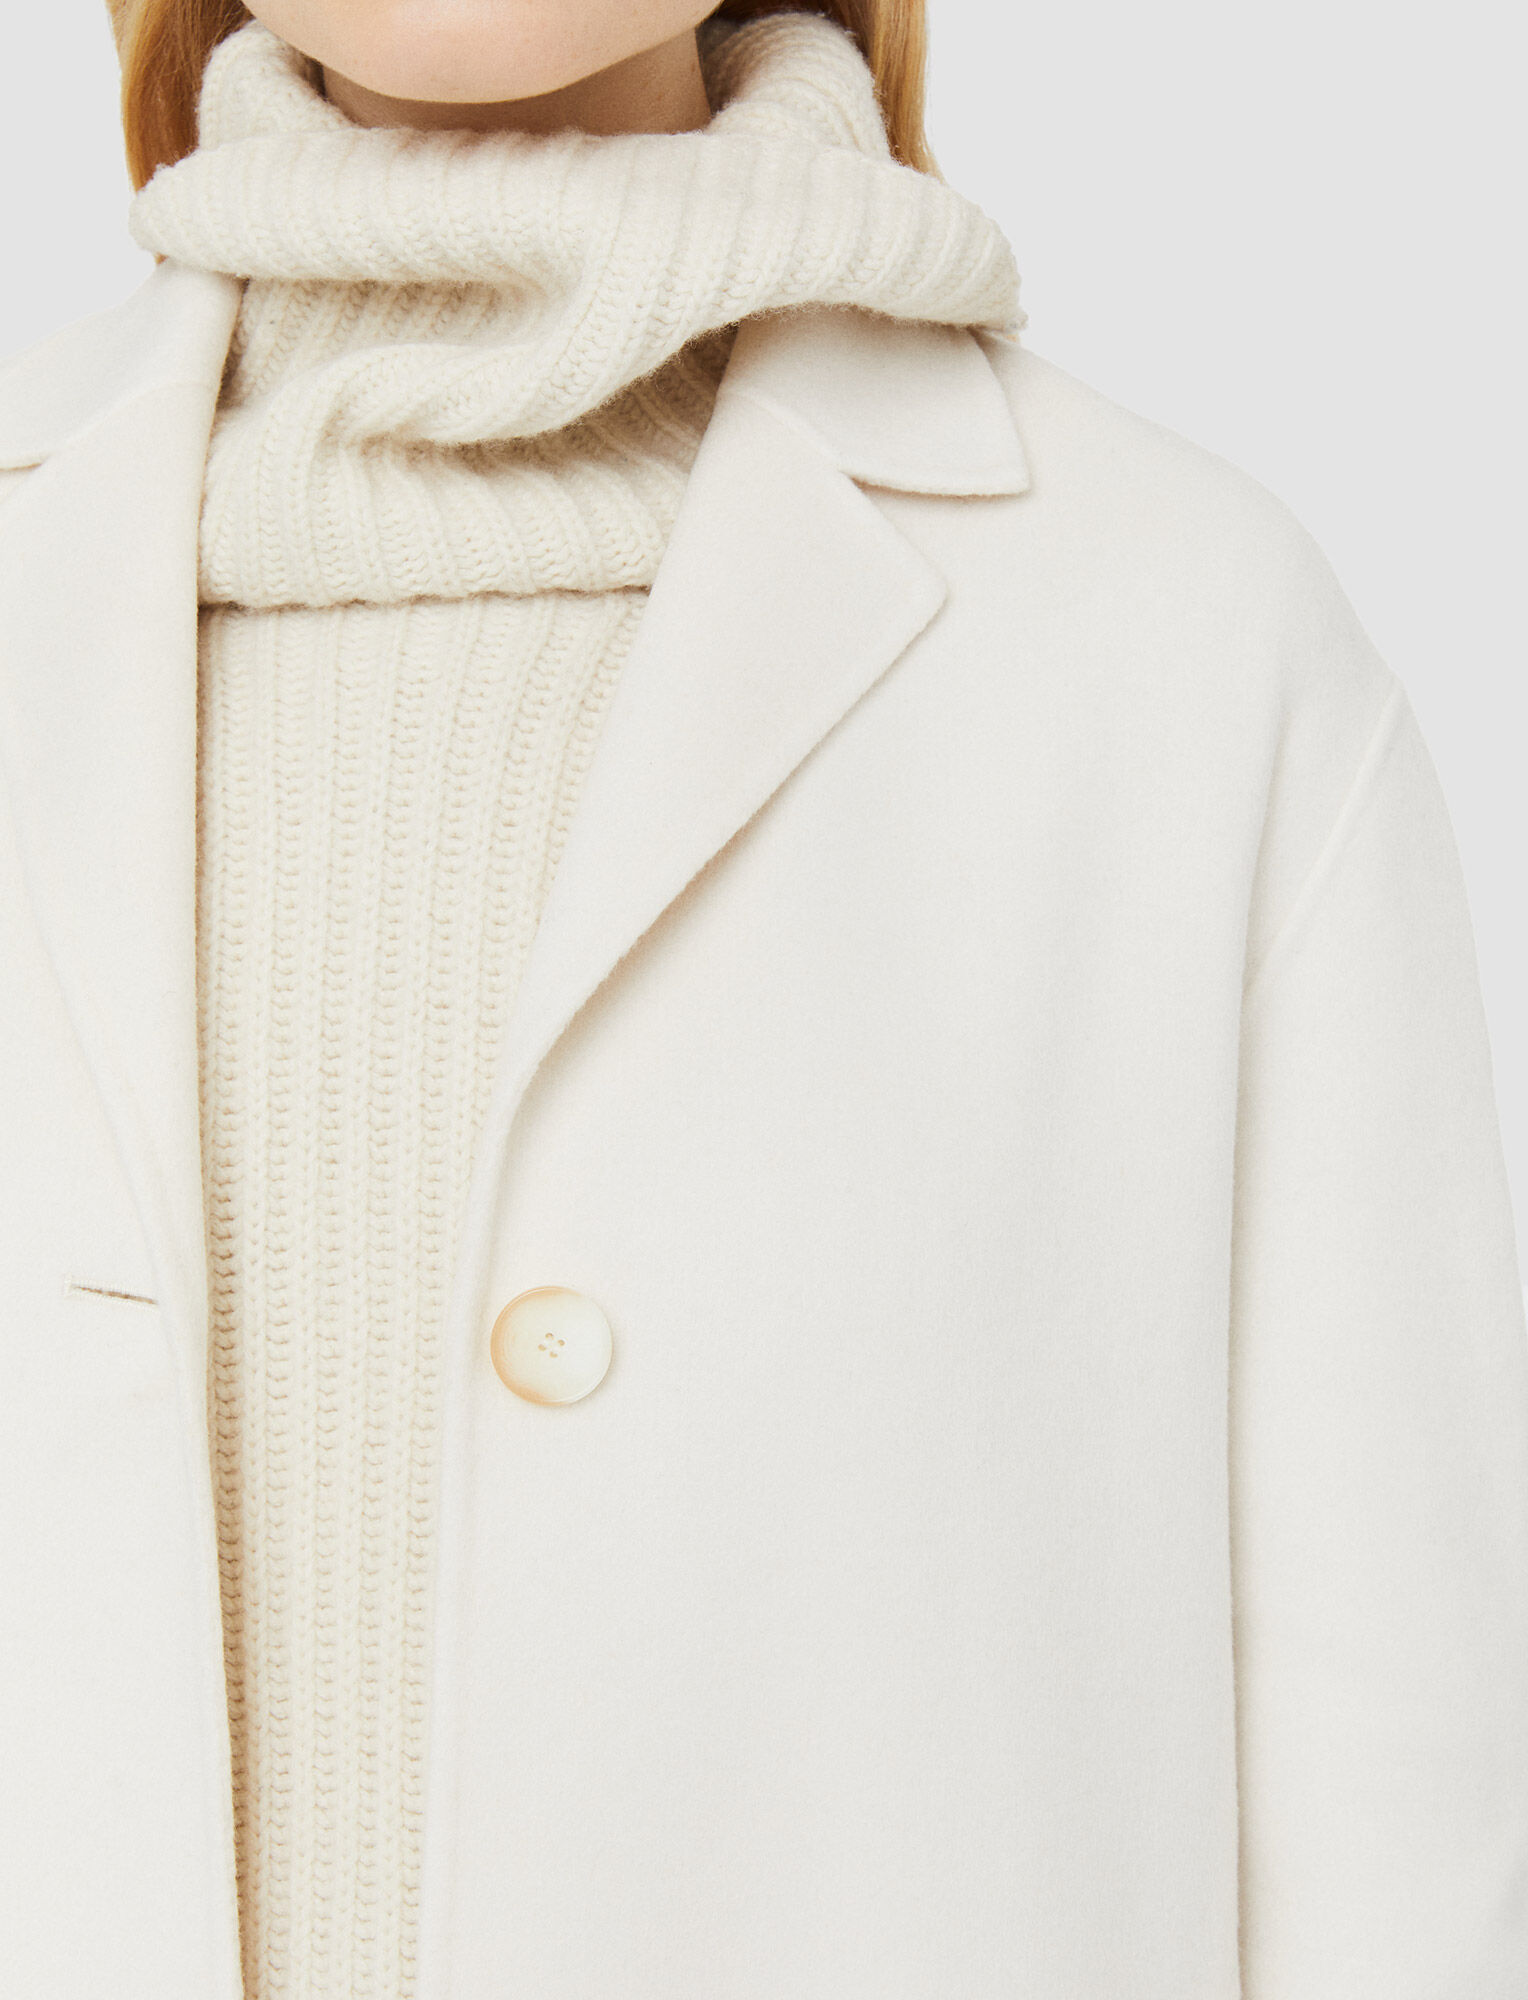 Joseph, Double Face Cashmere Caia Coat, in Ivory